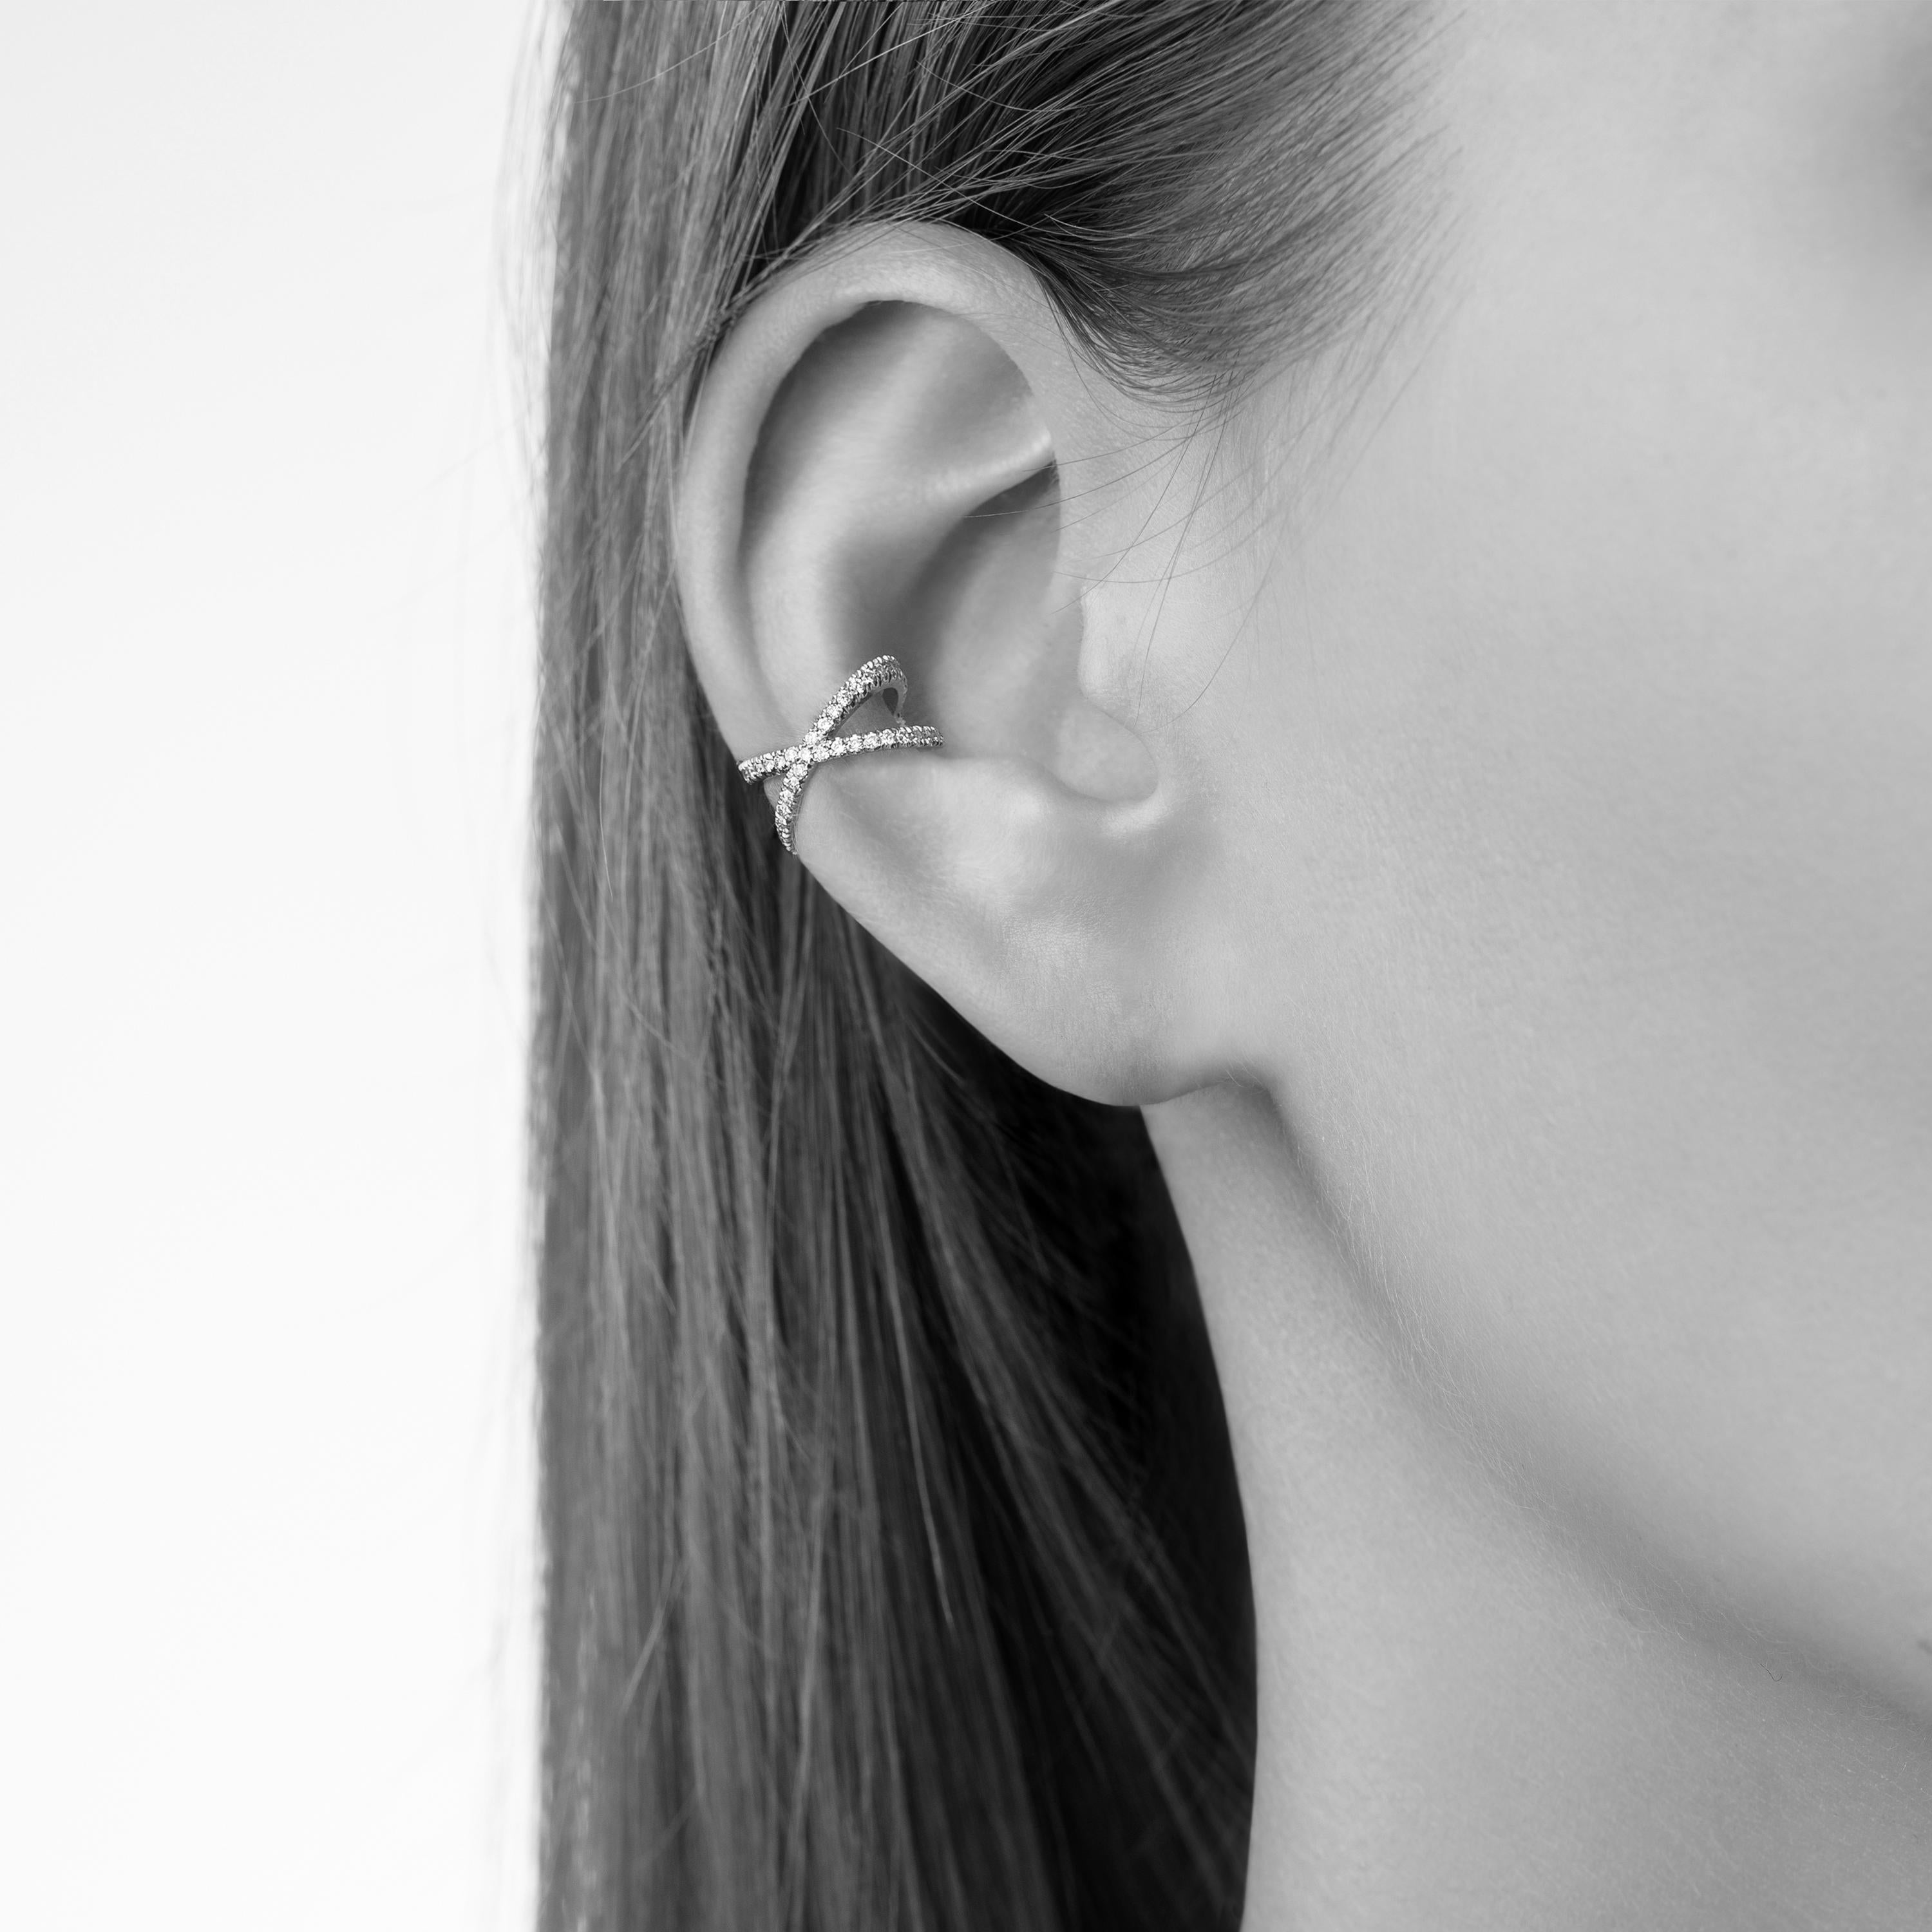 18K Blackened White Gold Ear Cuff with Black Diamonds

The Eva Fehren design aesthetic allows women to build looks that are personally relevant and unique to them. A collection that possesses bold femininity while remaining iconic and modern.  Known